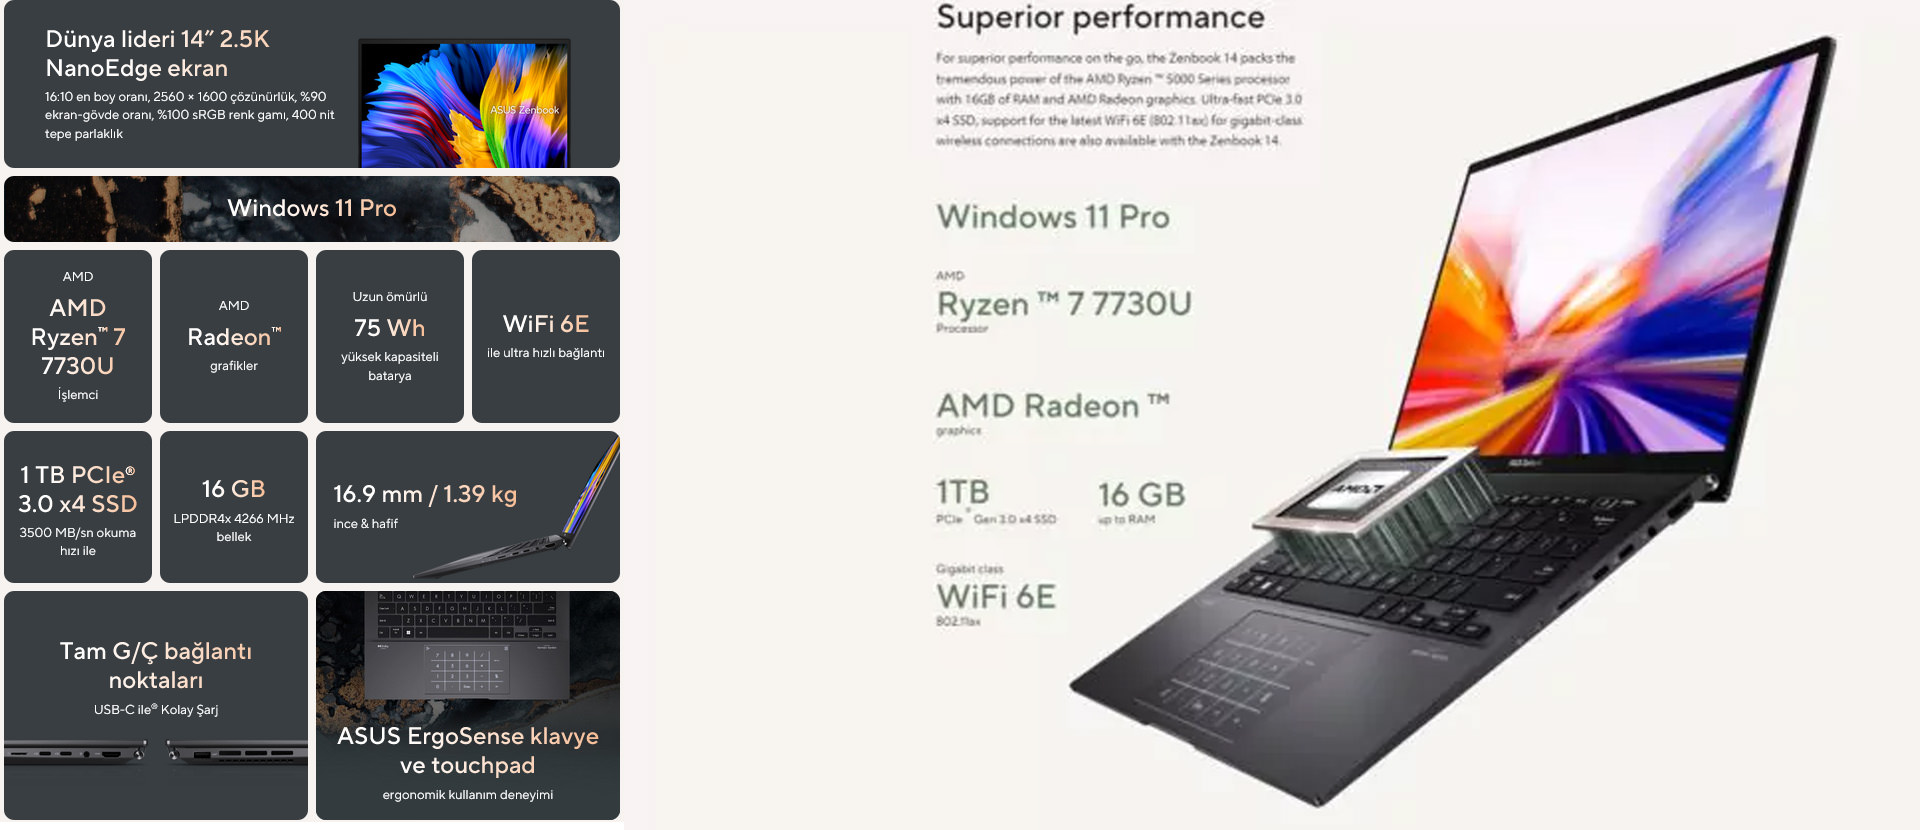 Official posters of the new Asus Zenbook with AMD processor